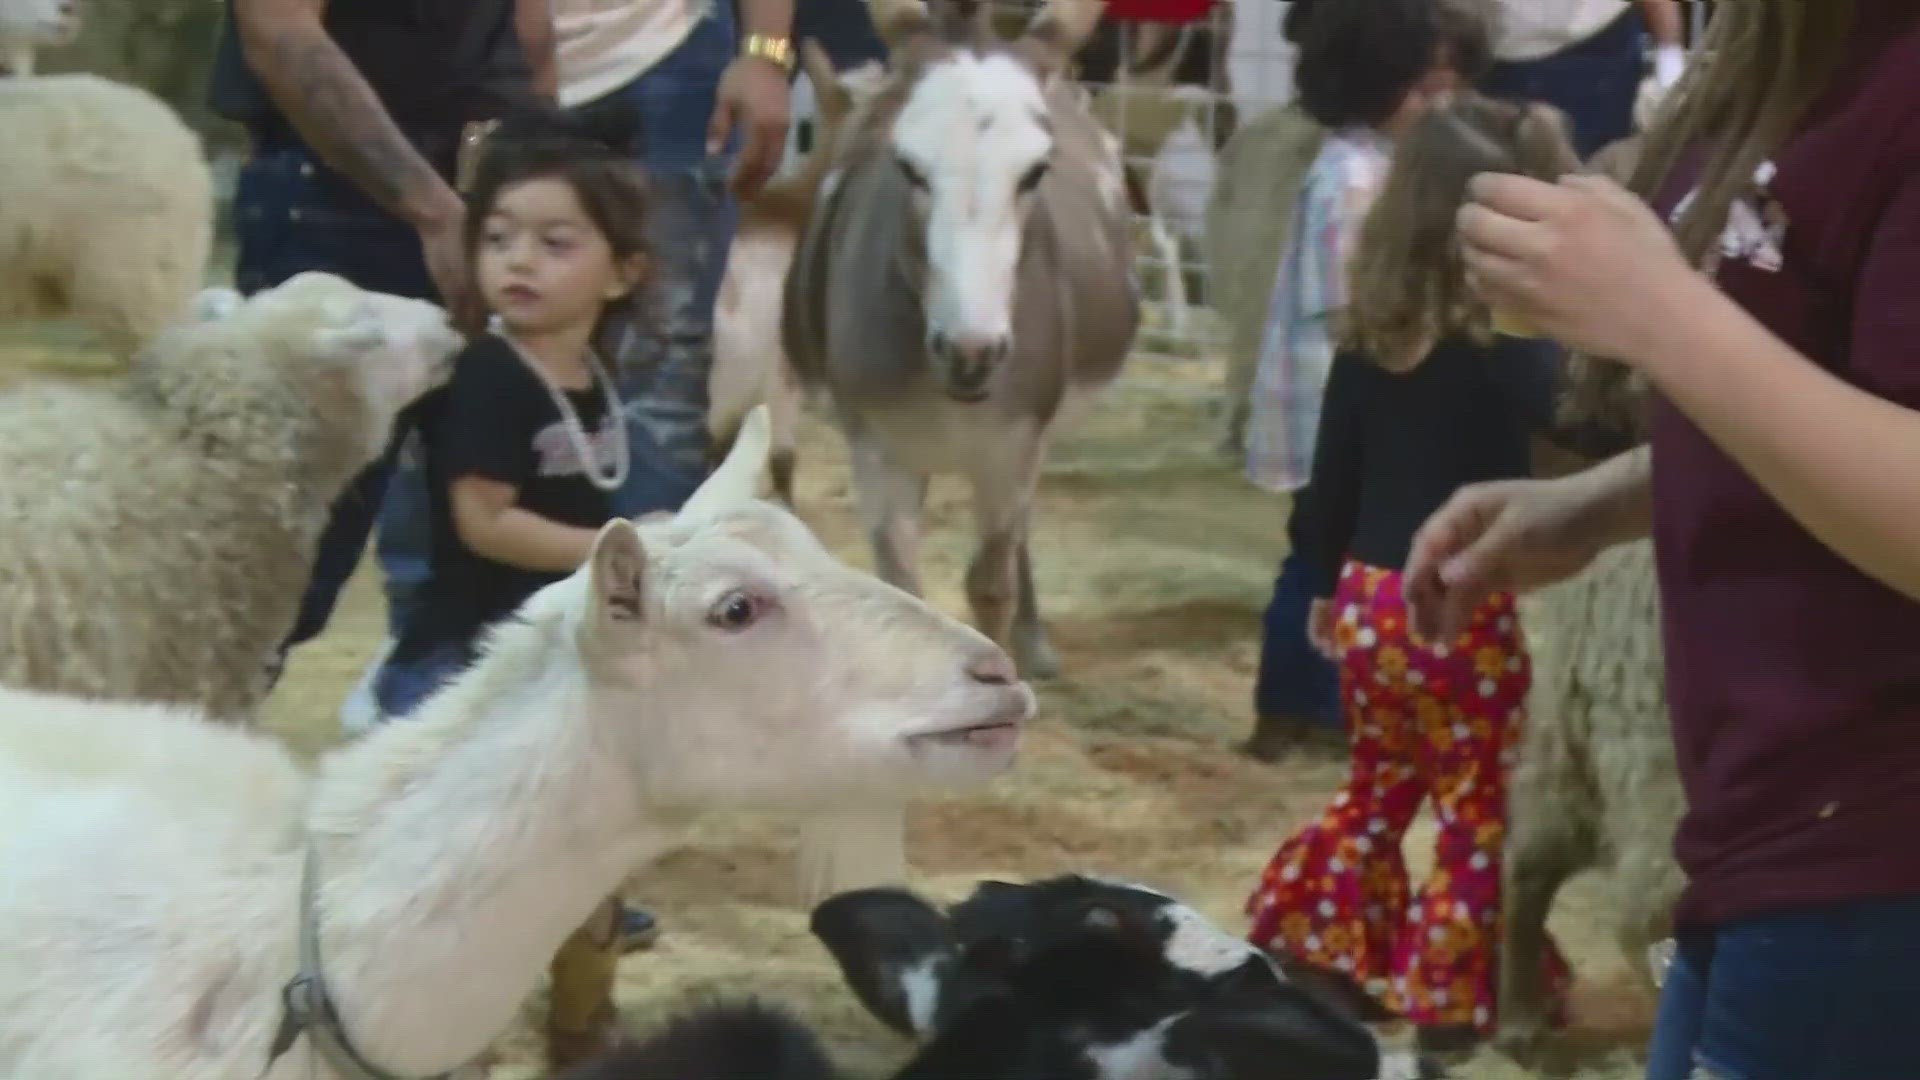 Simone Simpson talks about the petting zoo and the adorable kids dressed up at the rodeo.